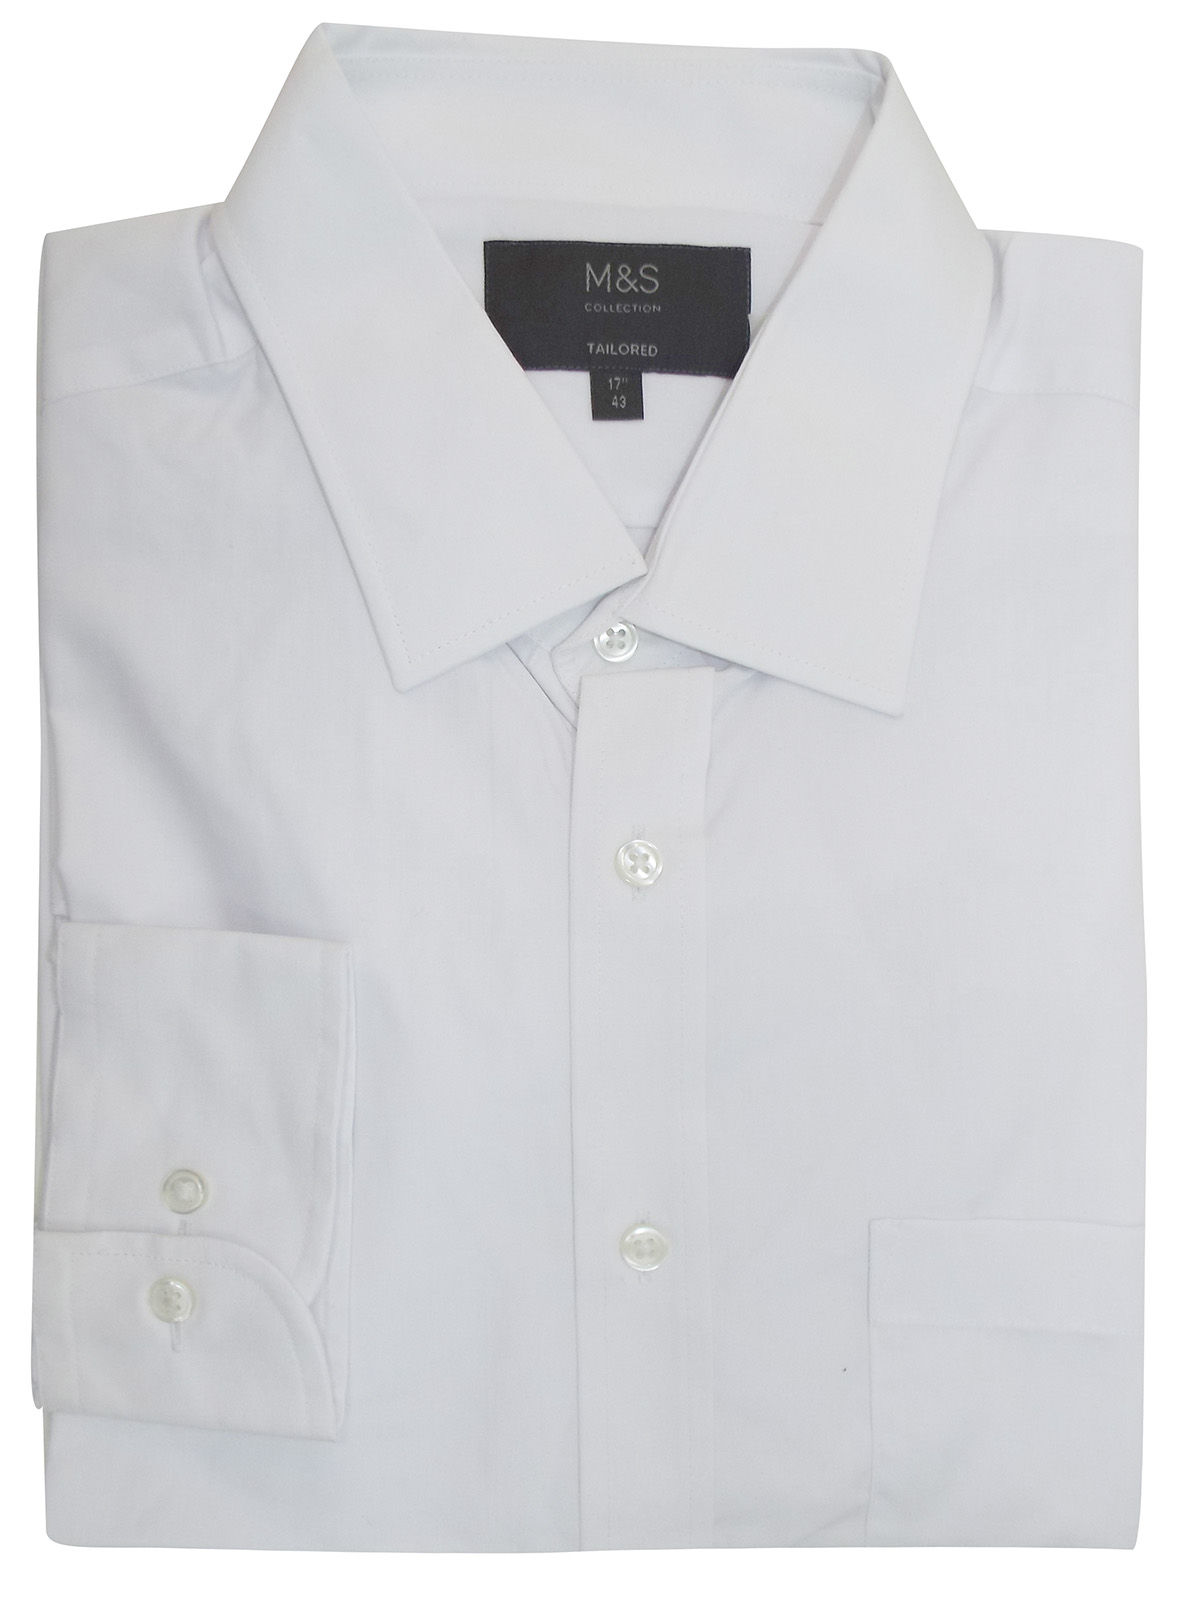 Marks and Spencer - - M&5 WHITE Pure Cotton Tailored Fit Long Sleeve ...